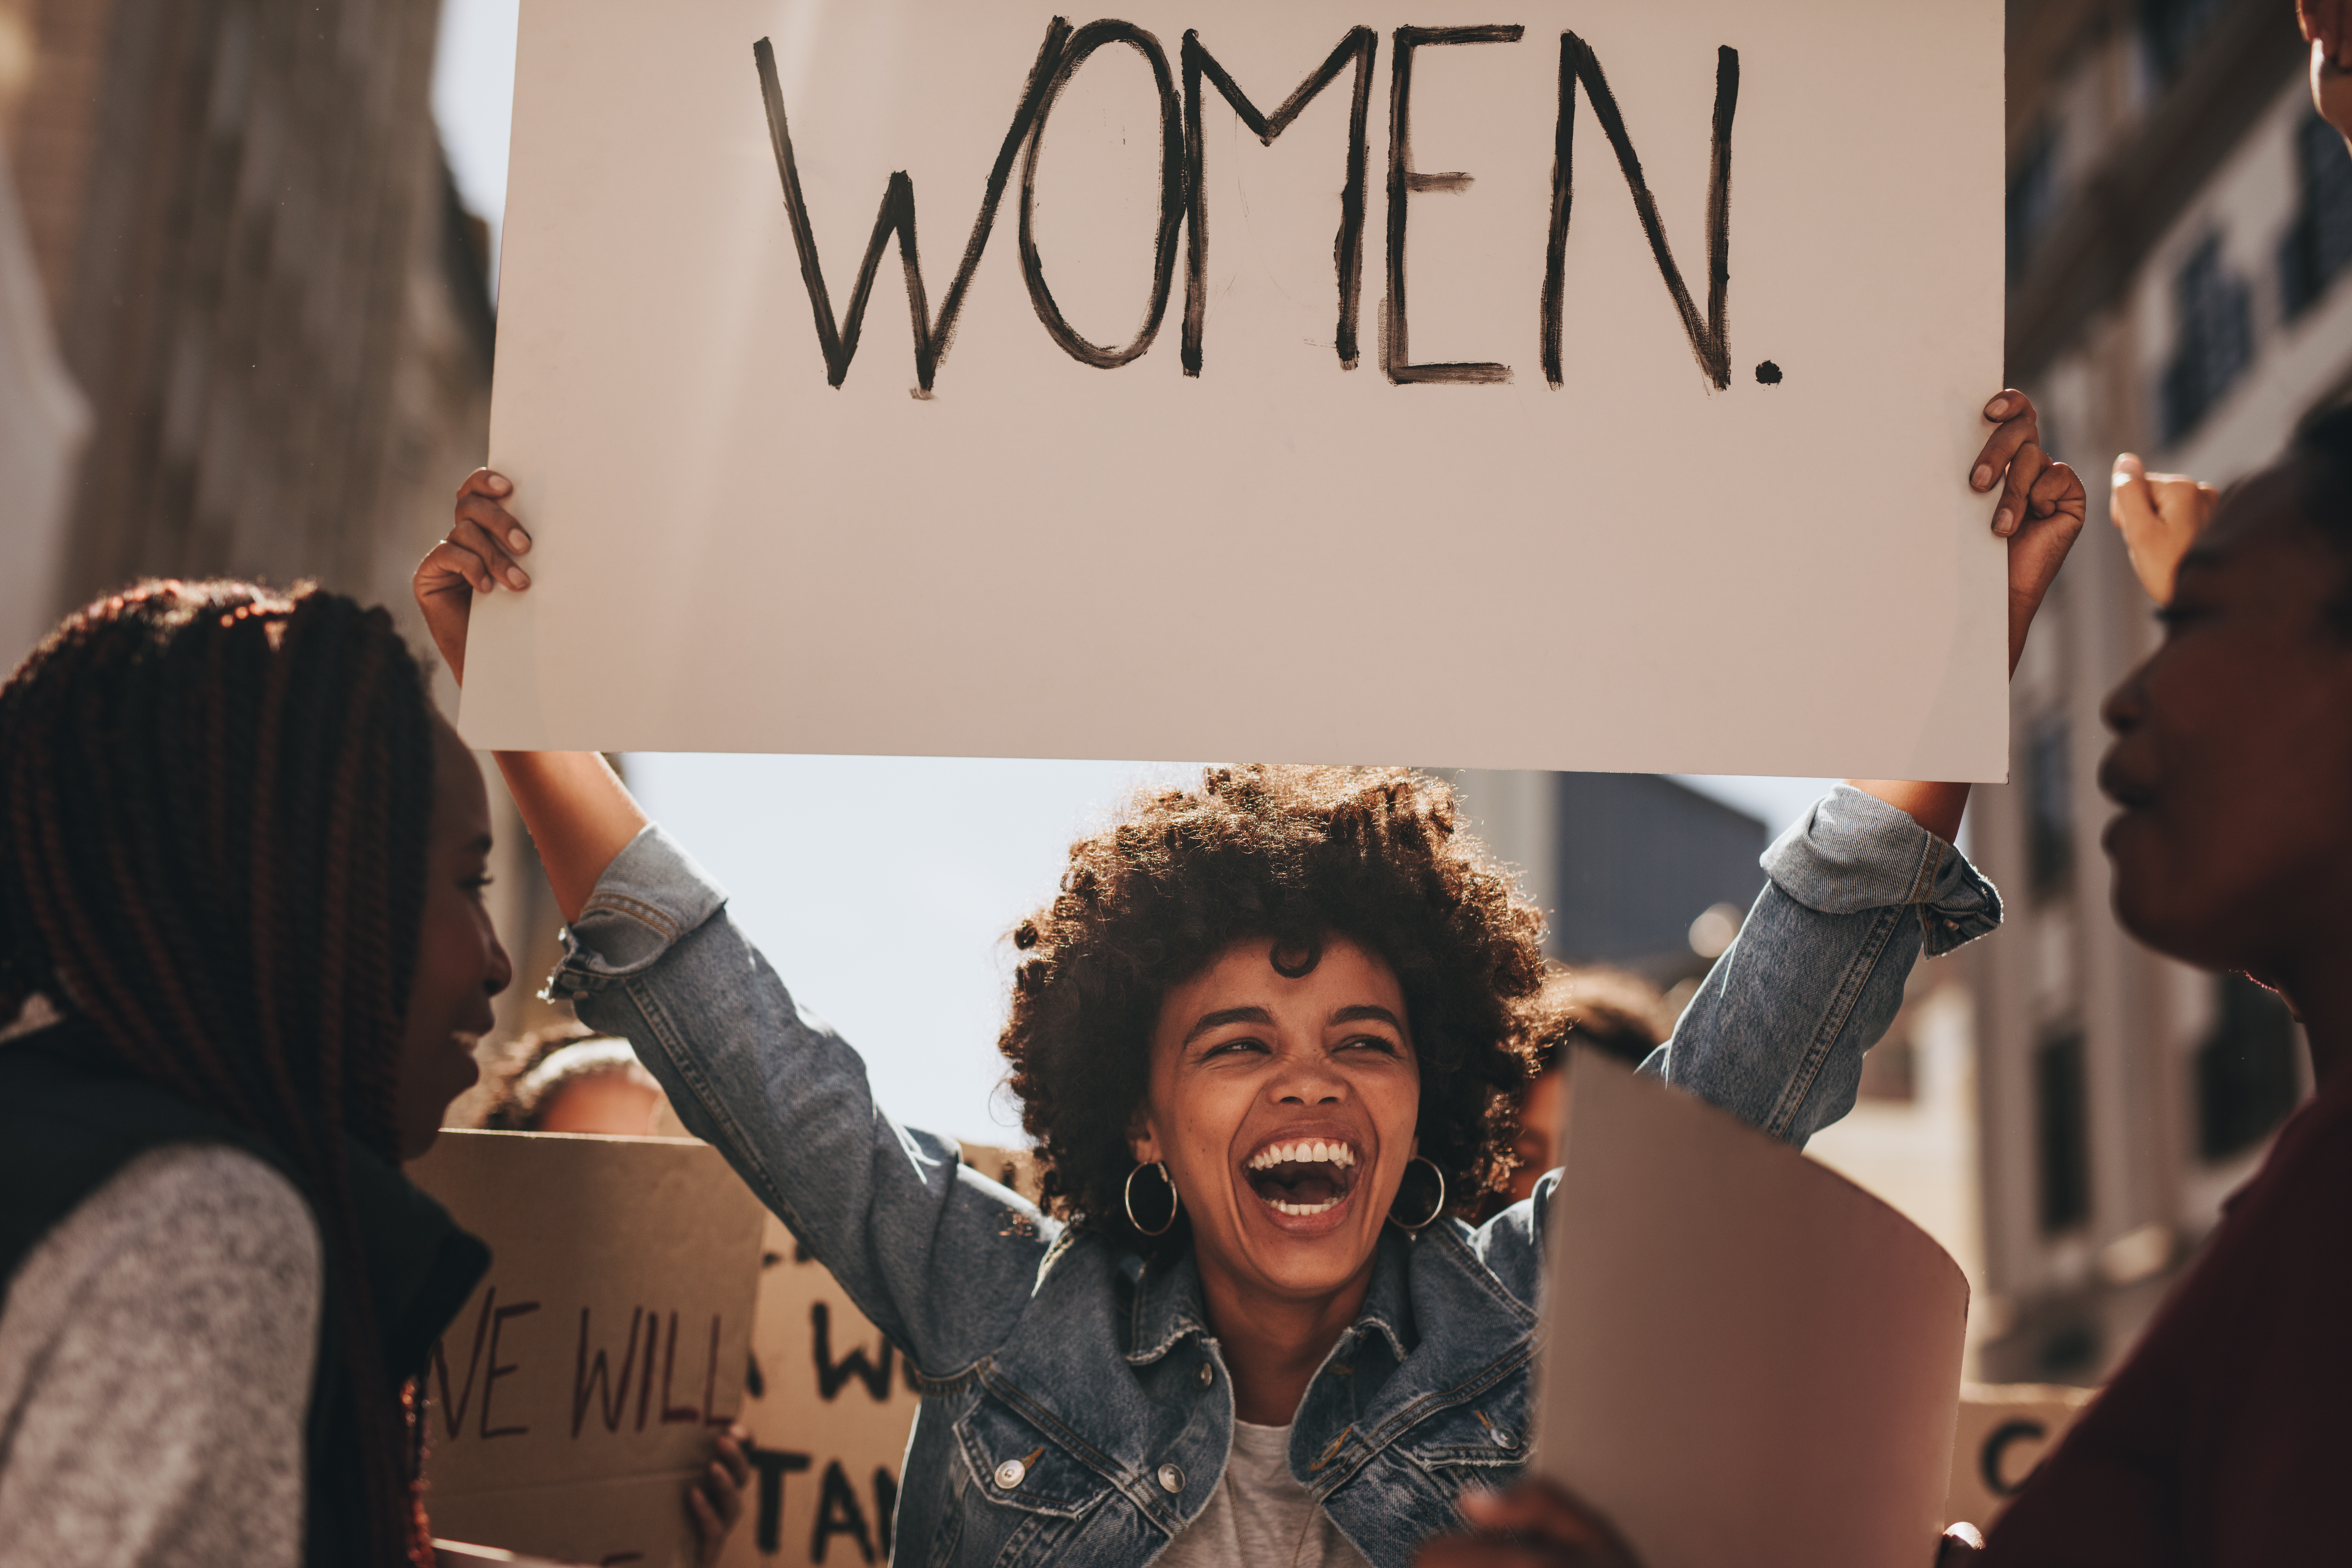 Laughing young woman holding a banner "WOMEN" during a protest.